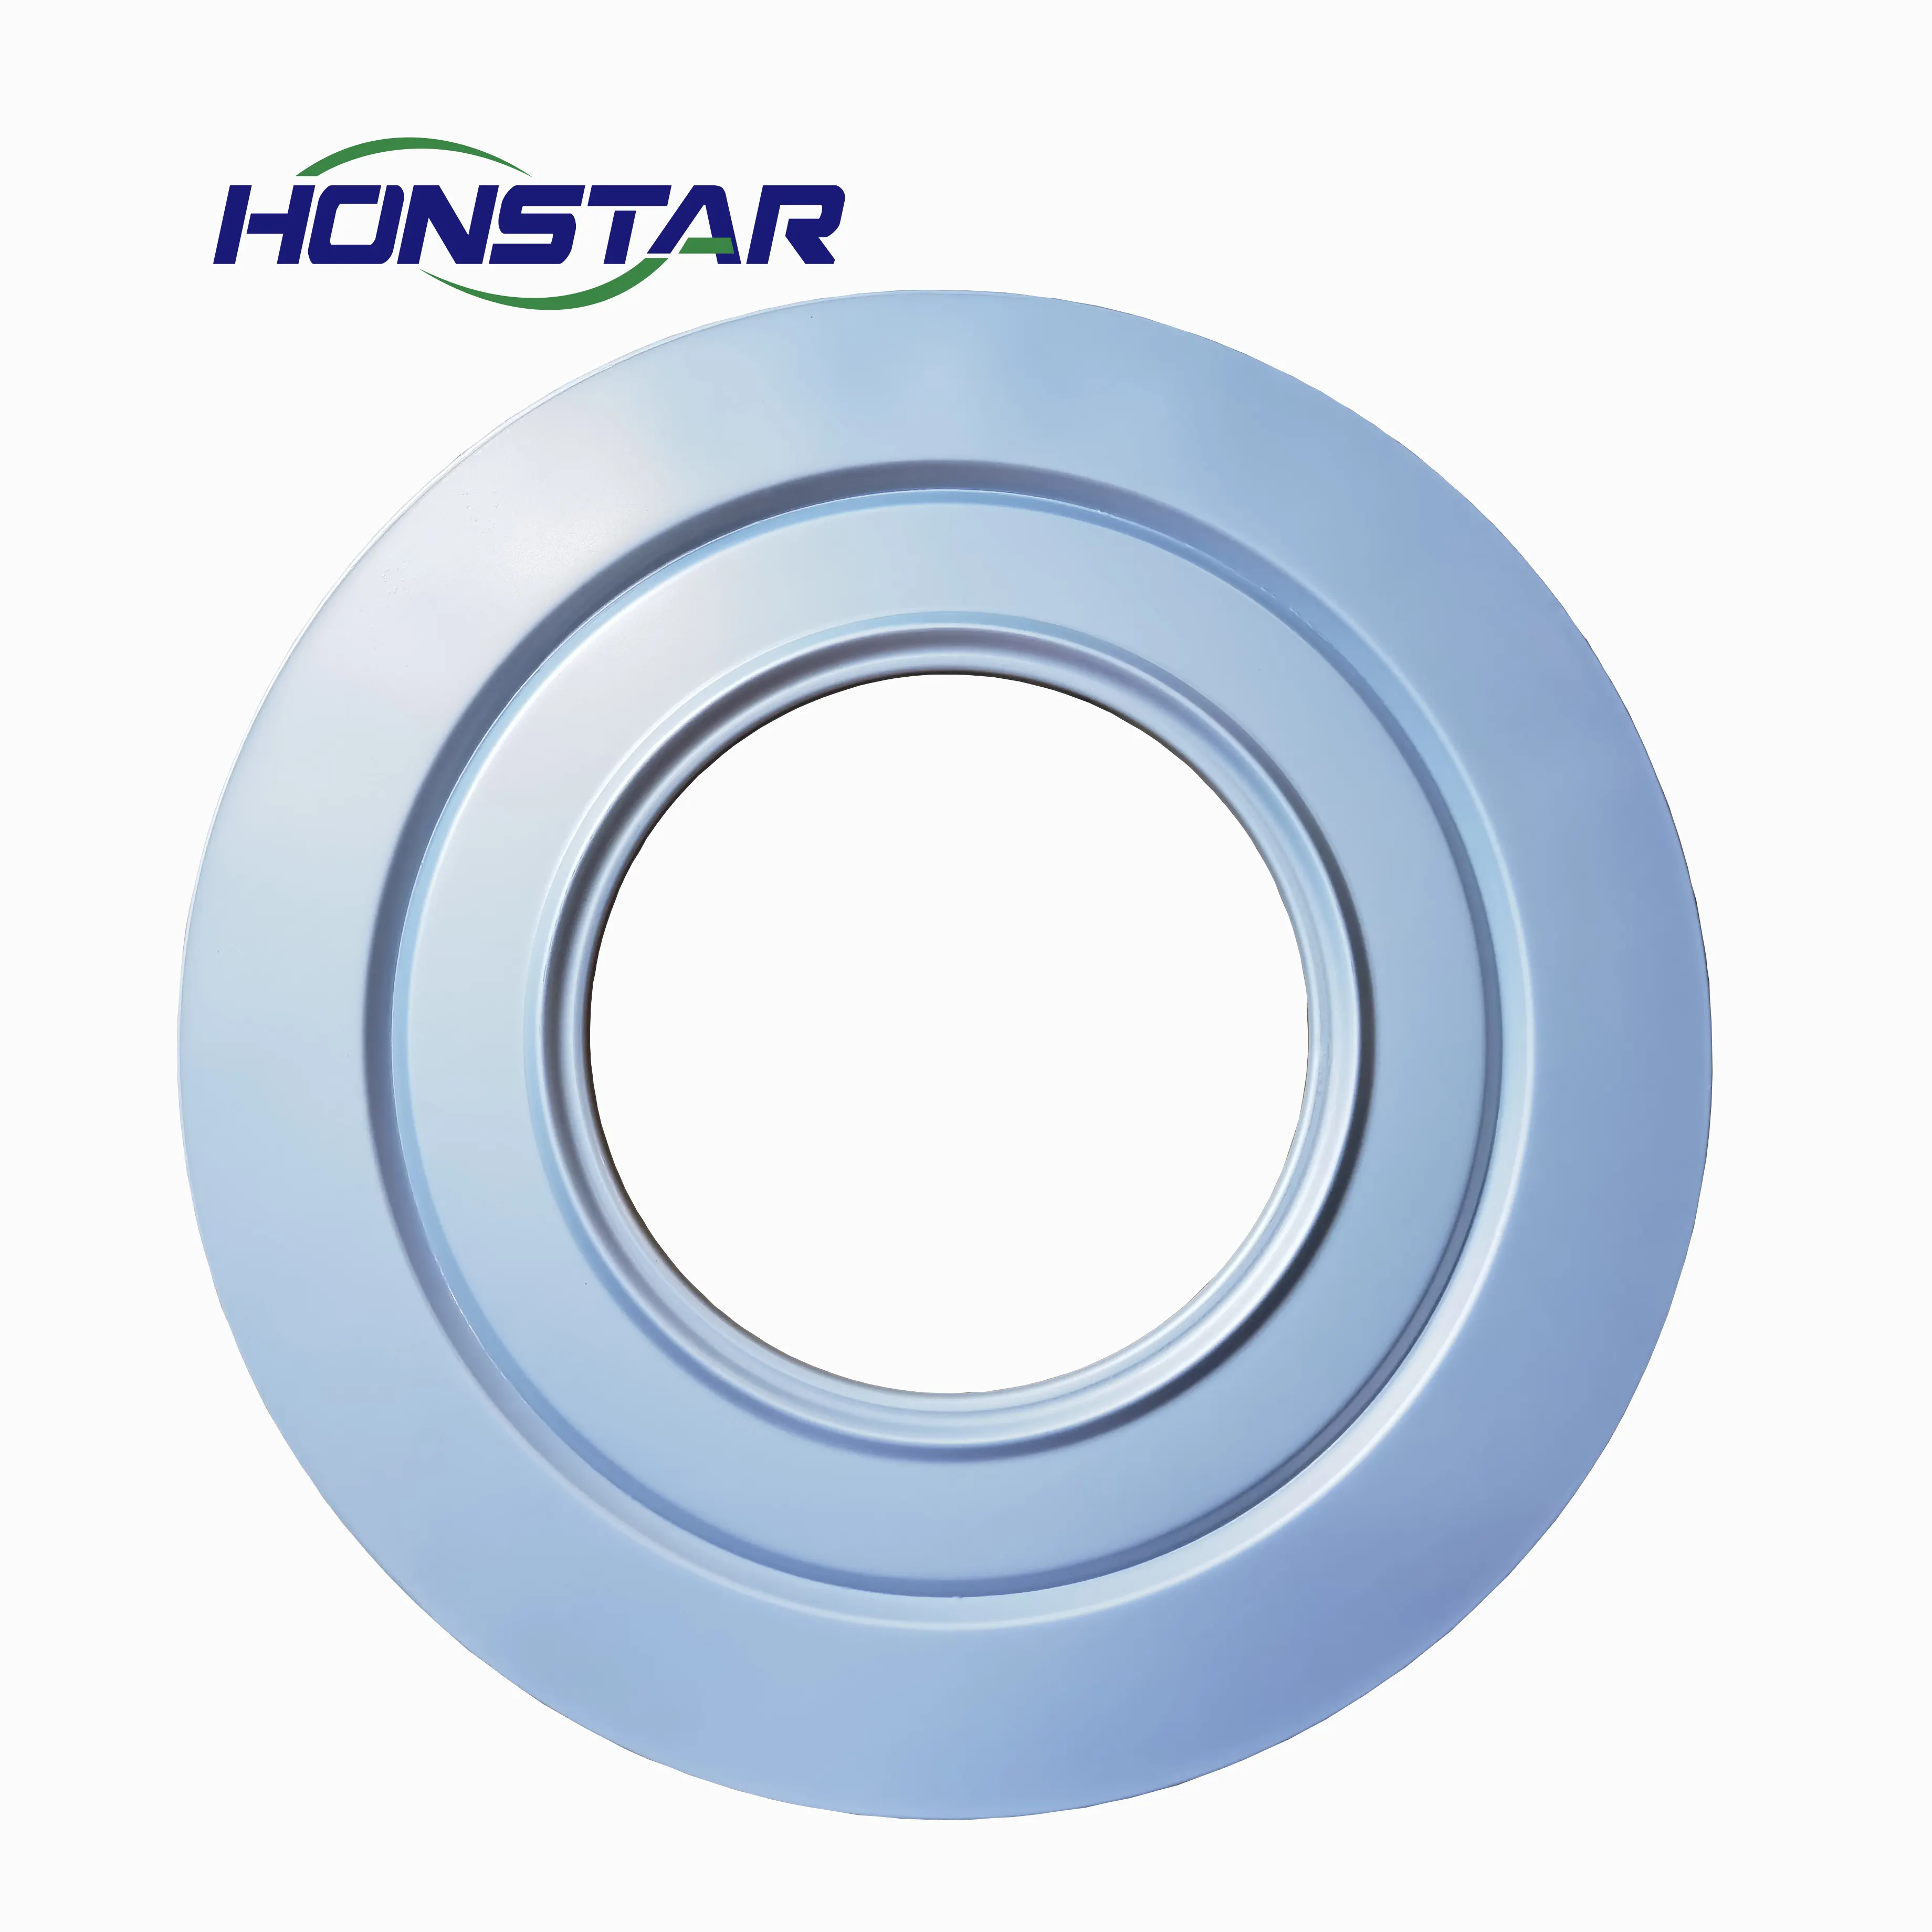 Honstar produces 0.8 mm thickness fingerprint-resistant air dust filter reinforcement end cover with 445*208mm